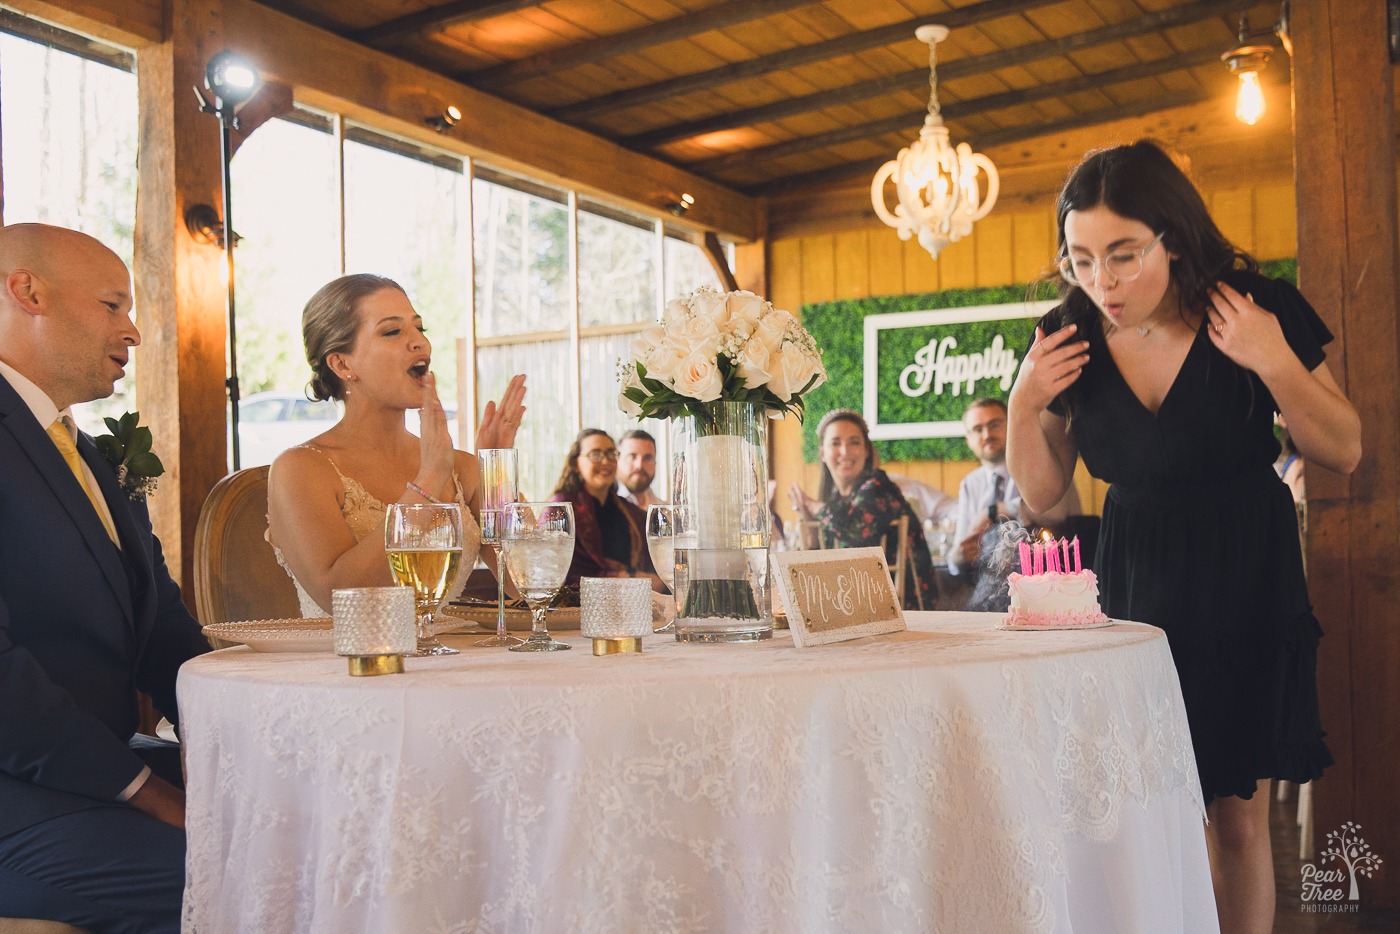 Bride's niece blowing out candles on a little birthday cake